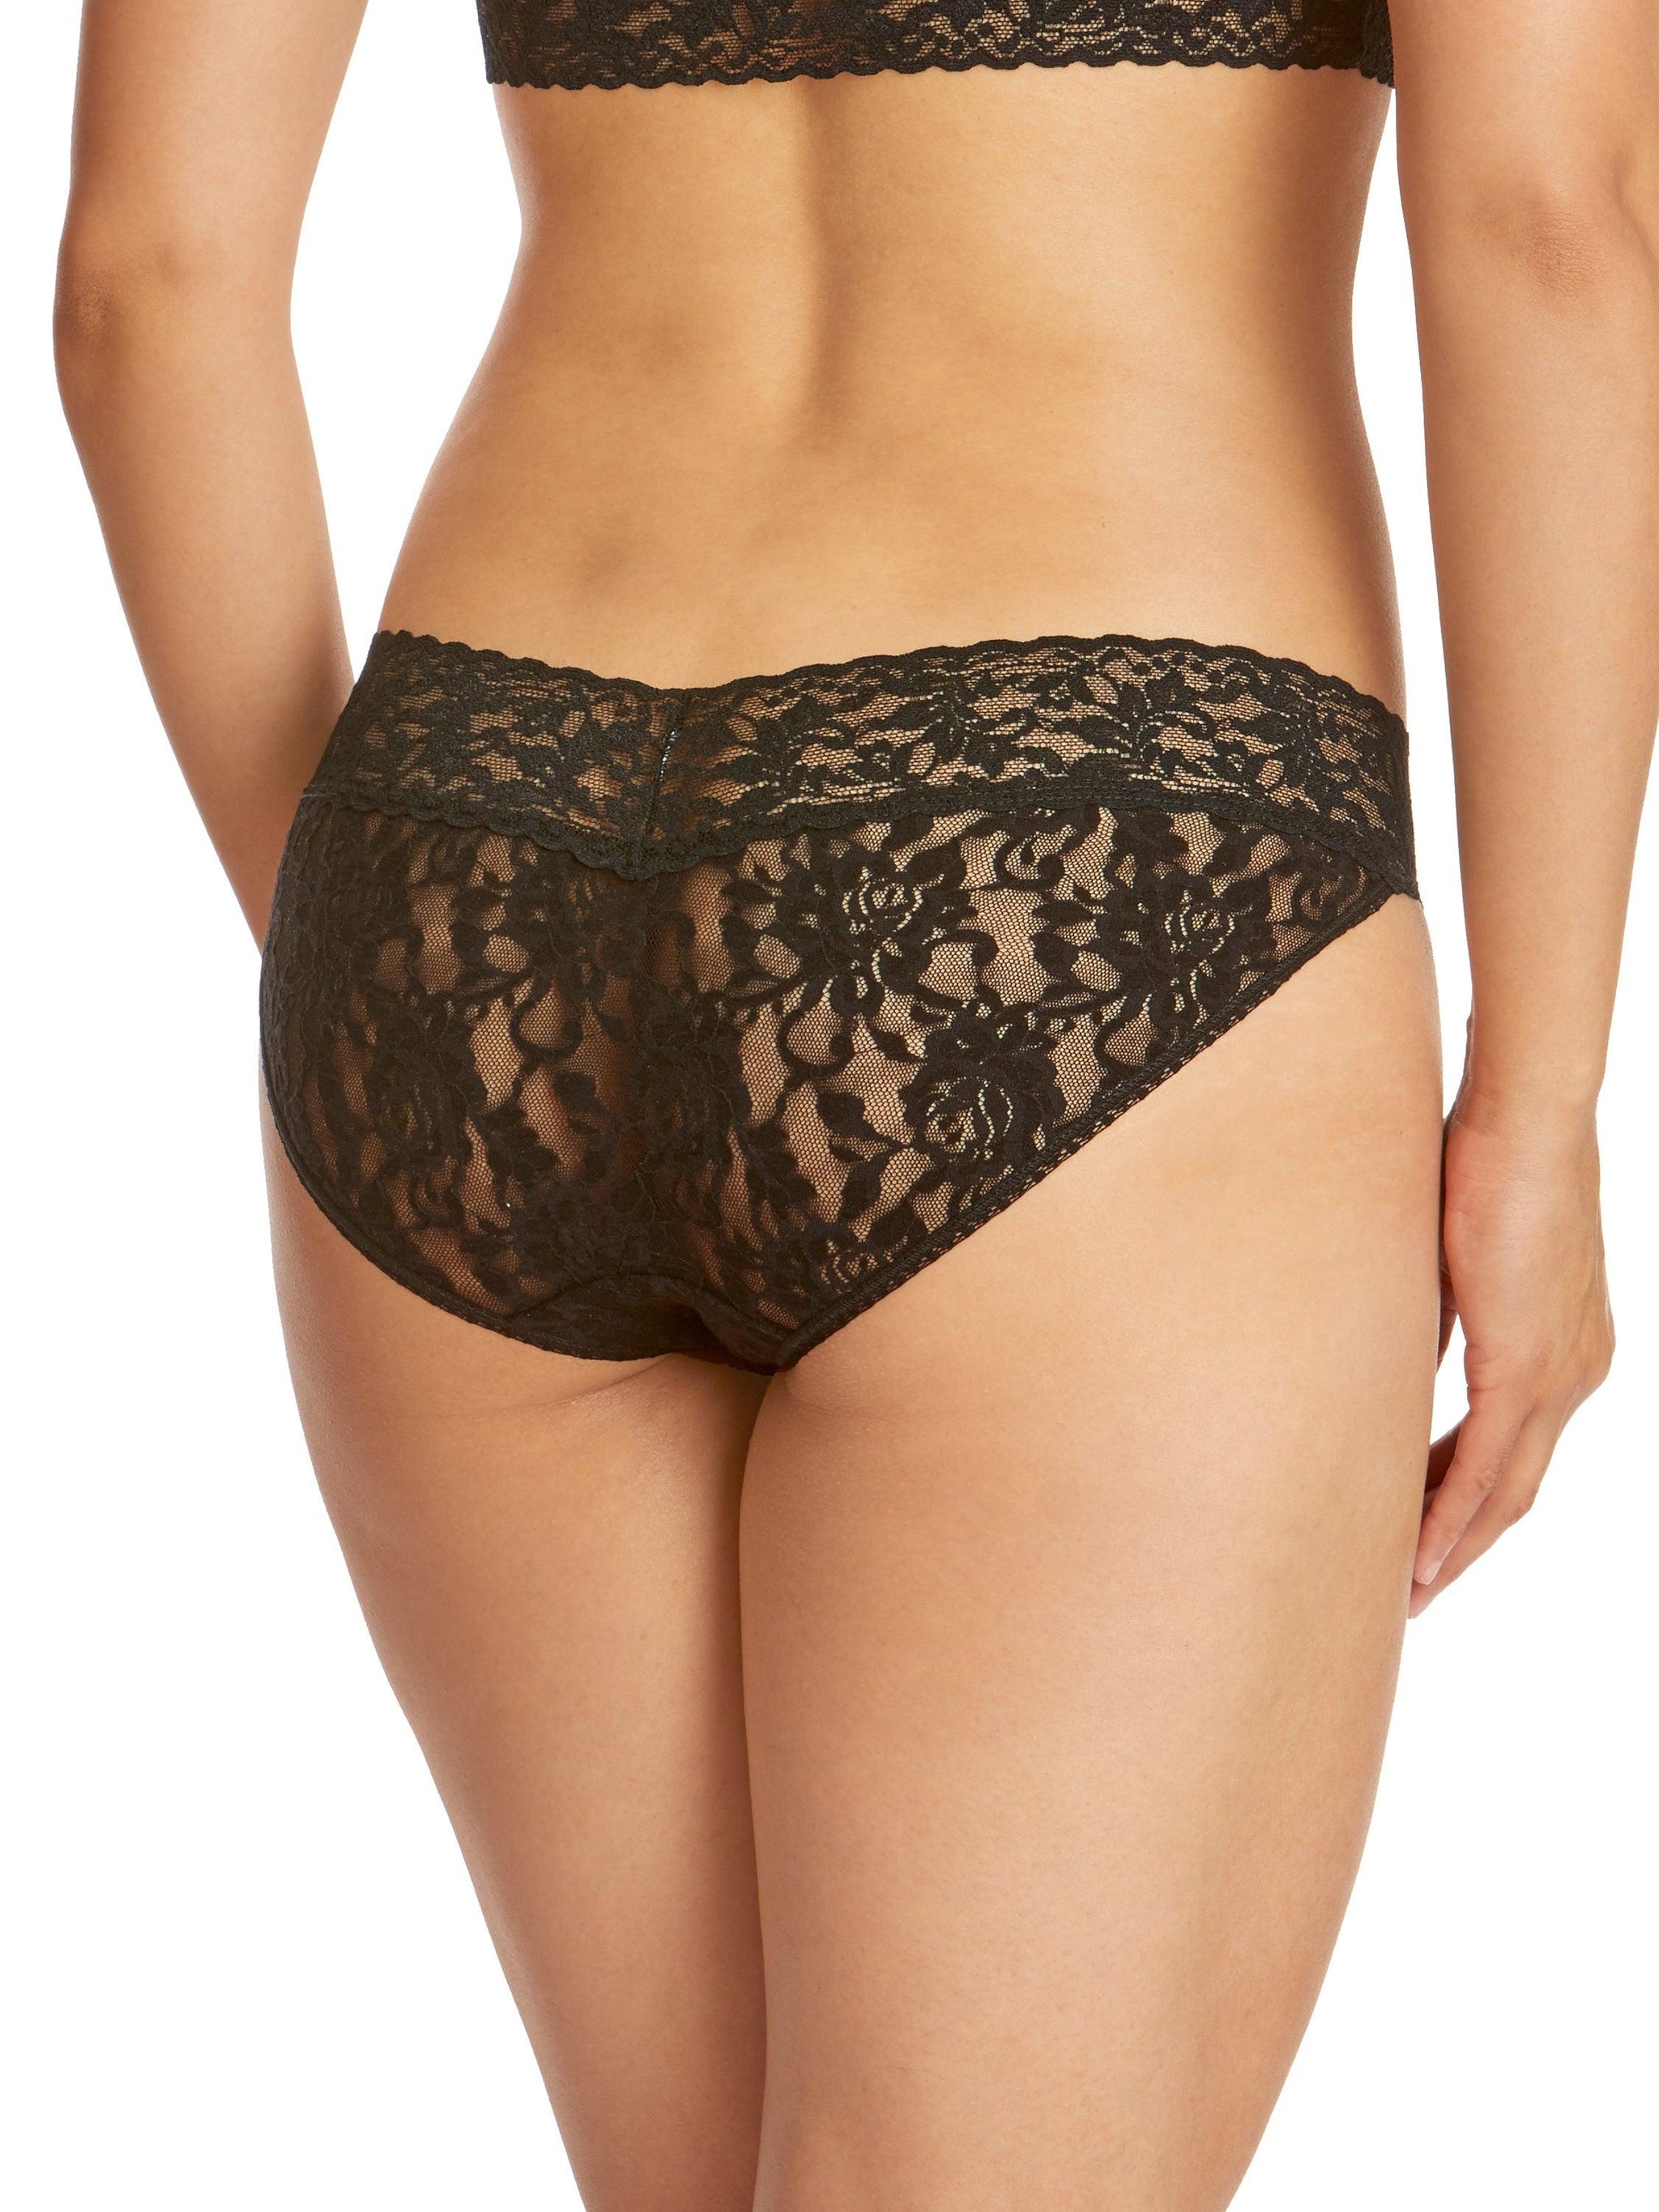 Valbonne Womens Lace Briefs Ladies French Knickers Underwear Boy Shorts  Panties